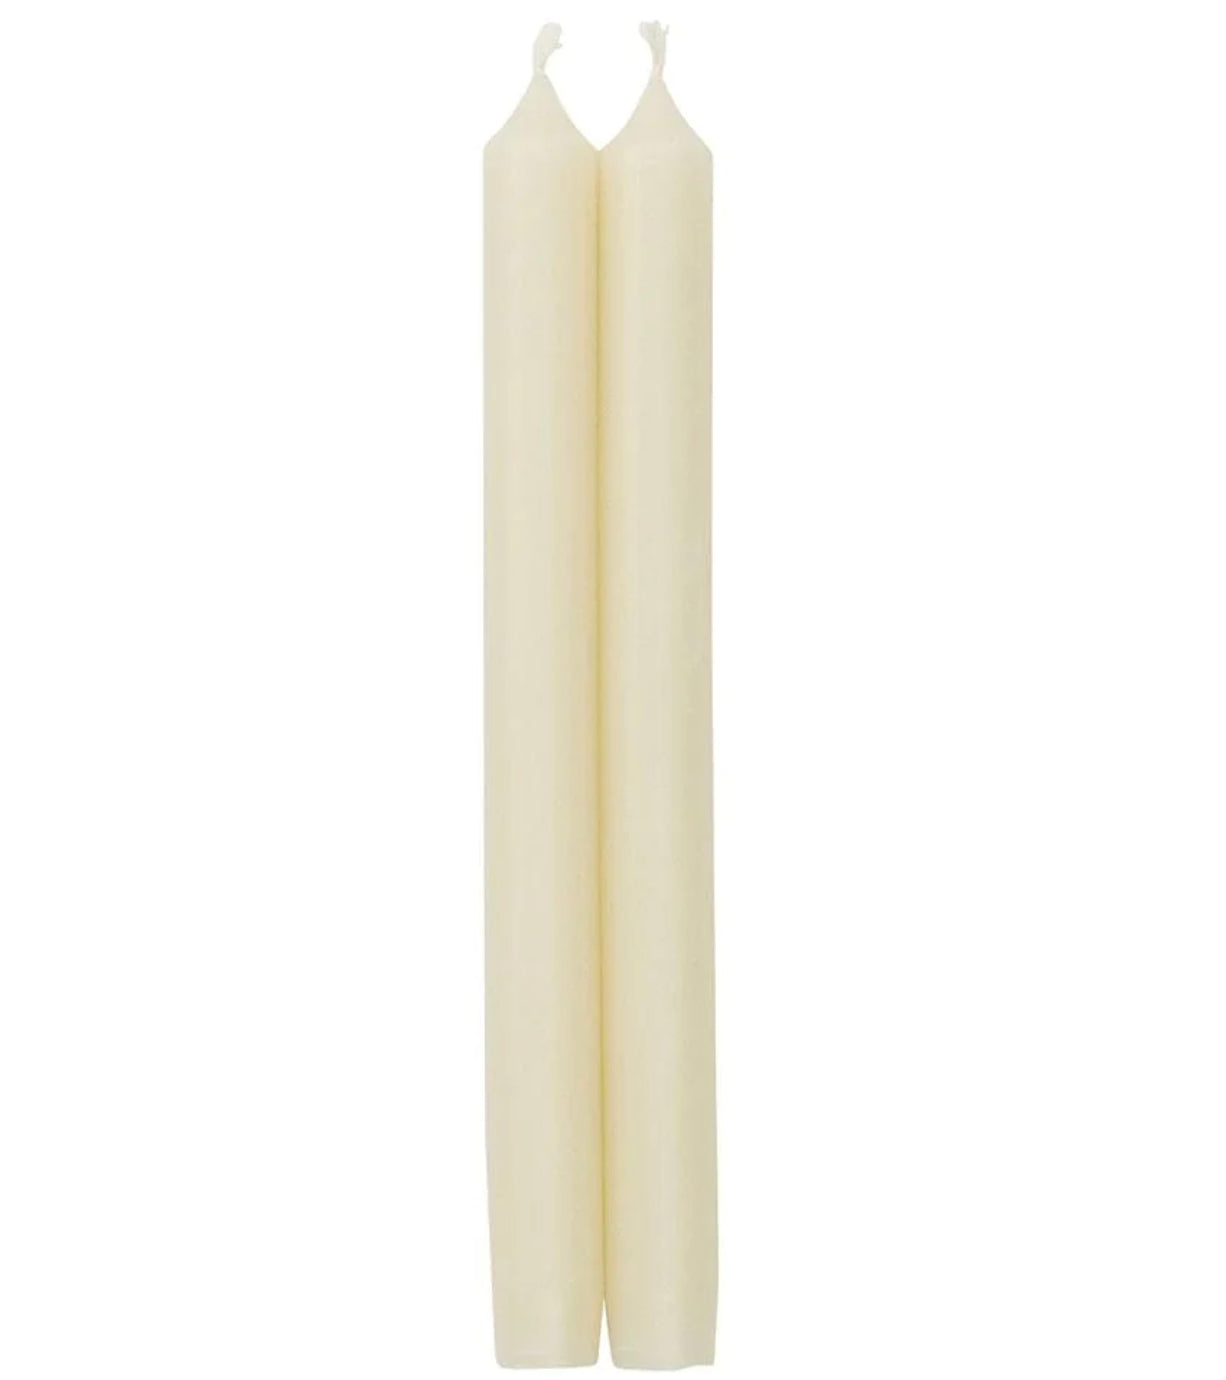 Caspari Tapered Candles in Ivory – 12 inch – 2pk